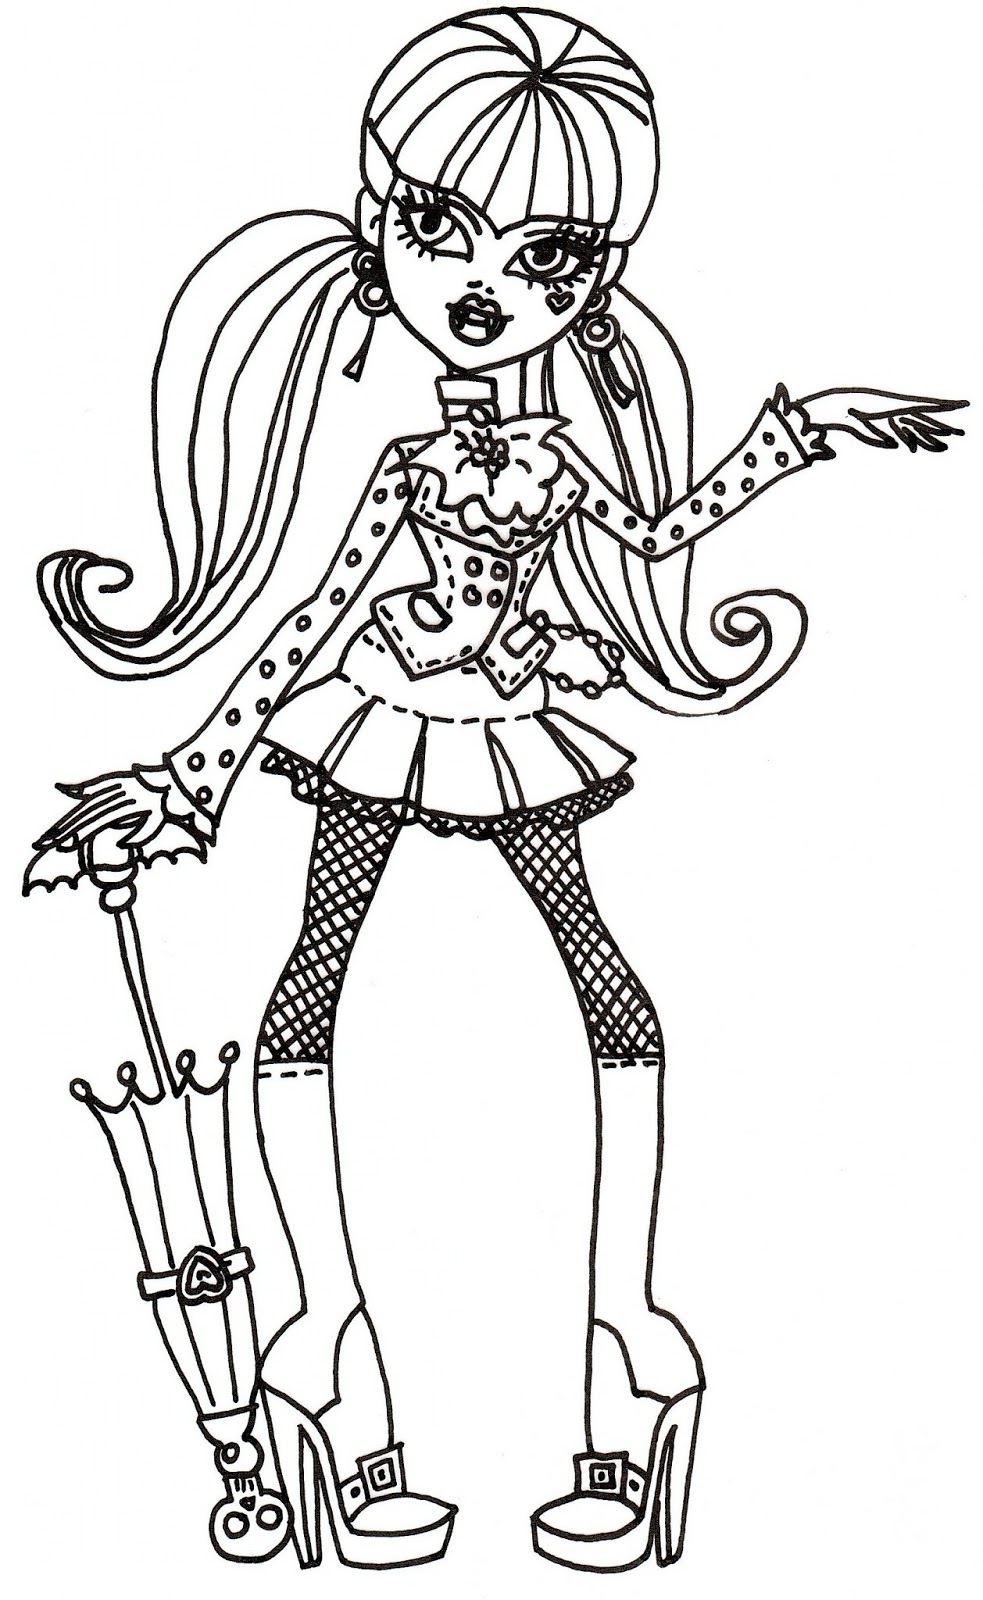 Monster high draculaura coloring pages - Imagui